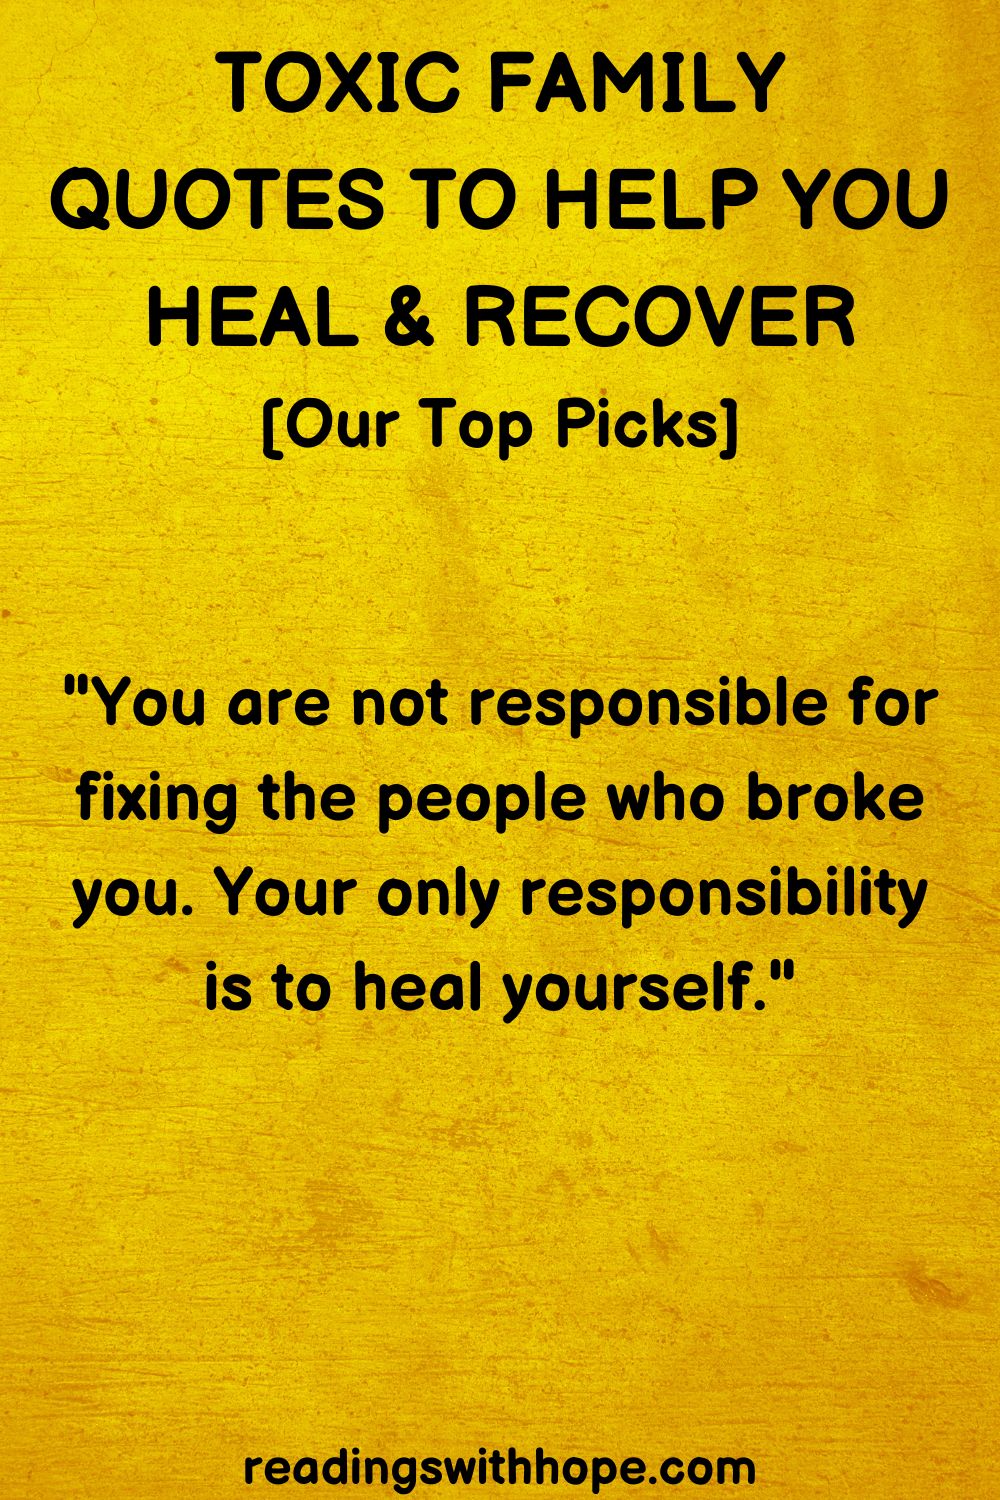 toxic family quotes to help heal and recover